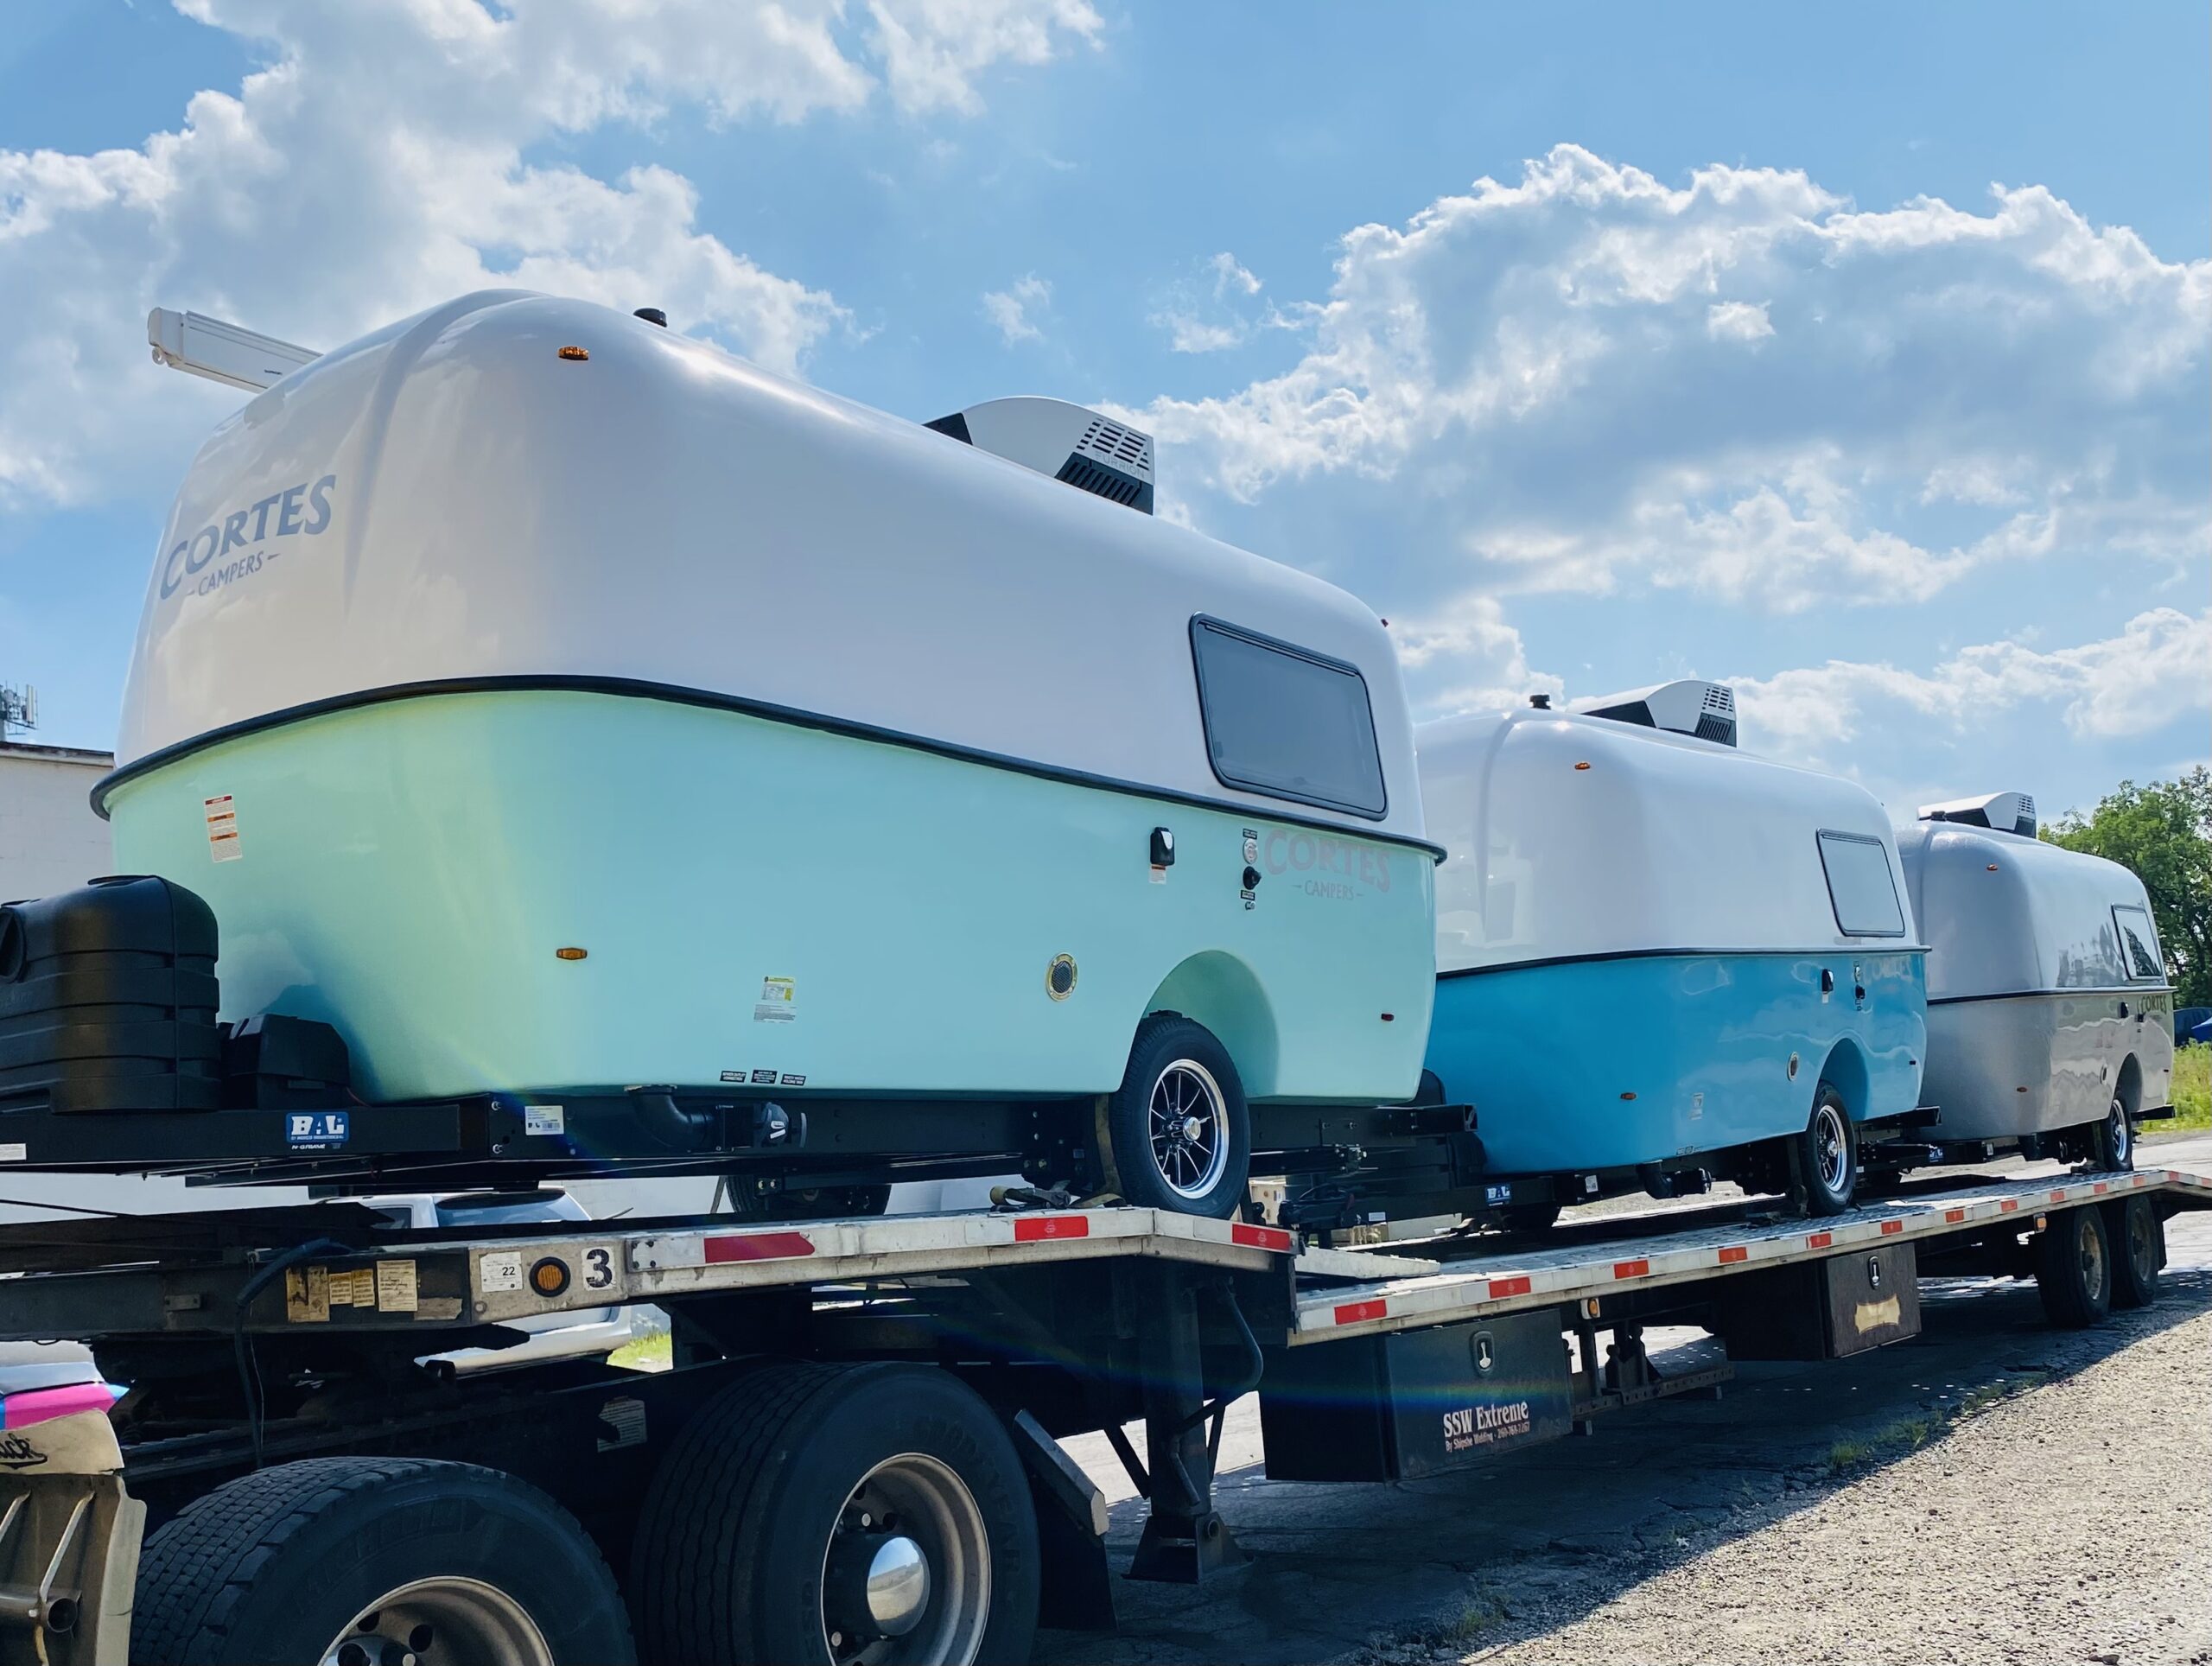 Cortes Campers triple load headed to a Cortes Campers Dealer in Canada.